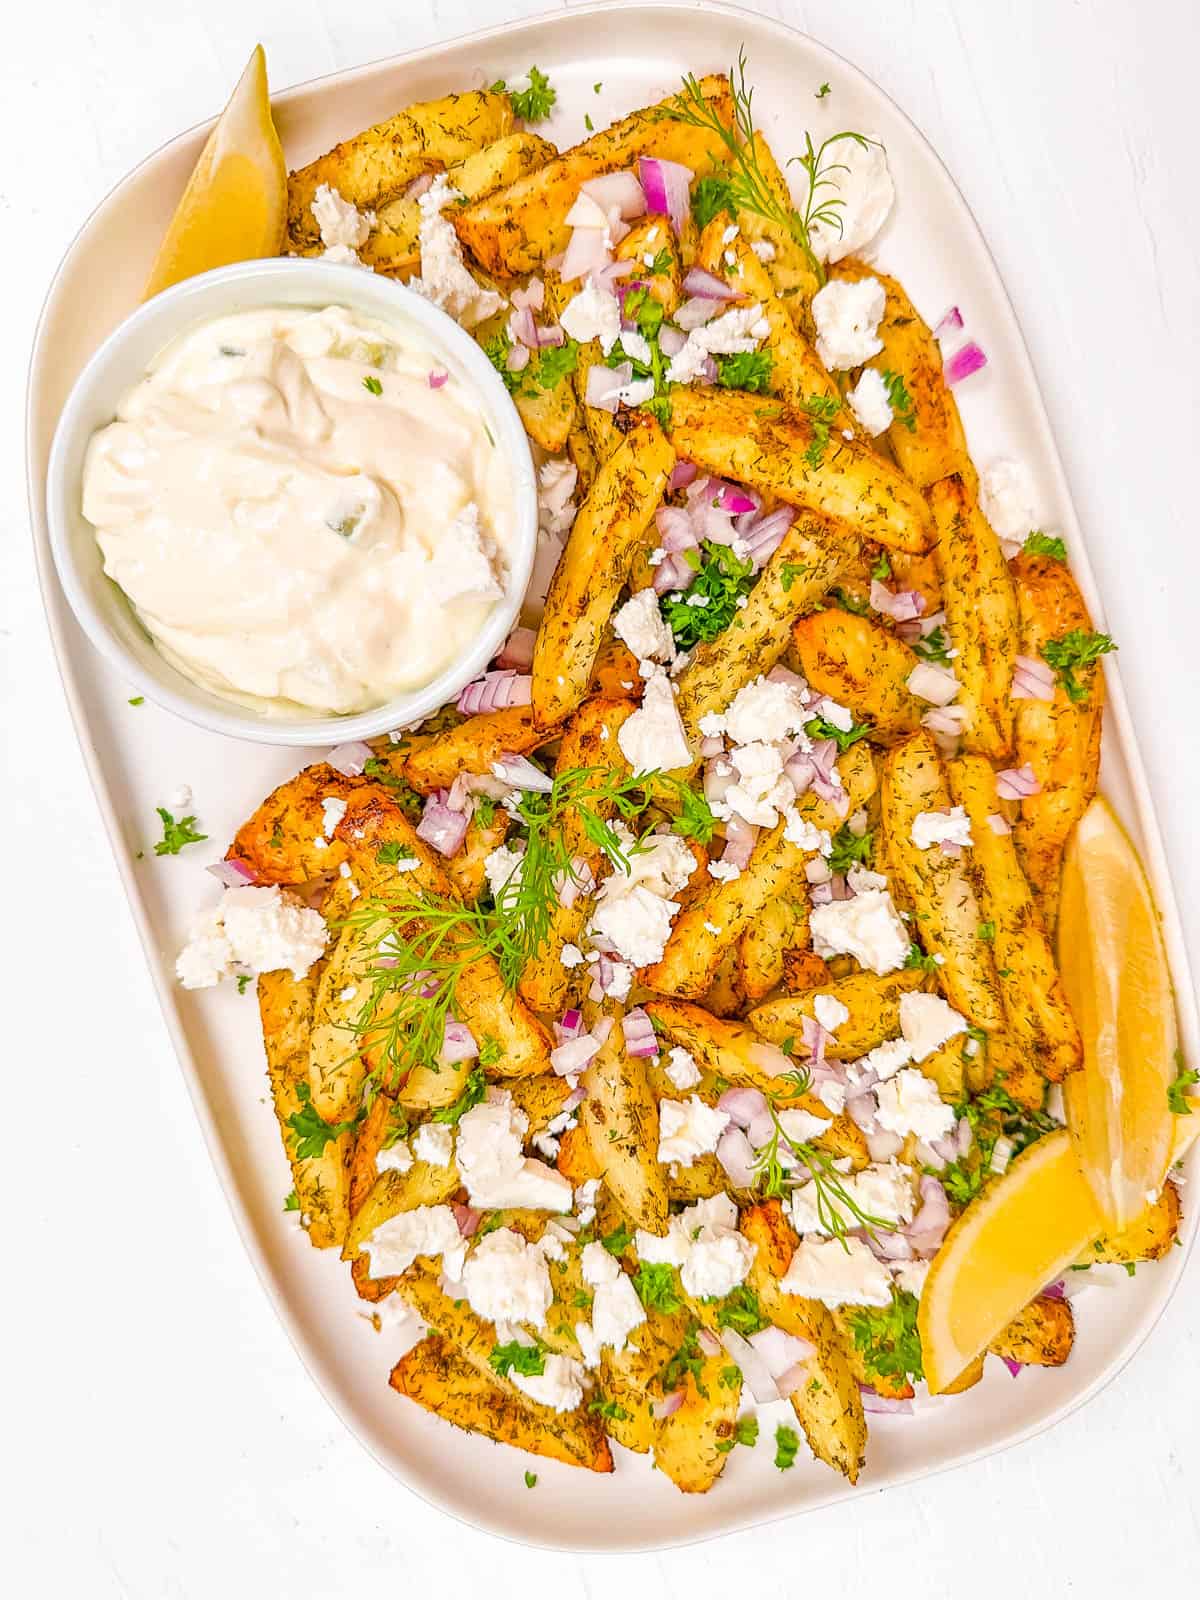 Loaded Greek french fries on a white plate, with tzatziki sauce on the side.